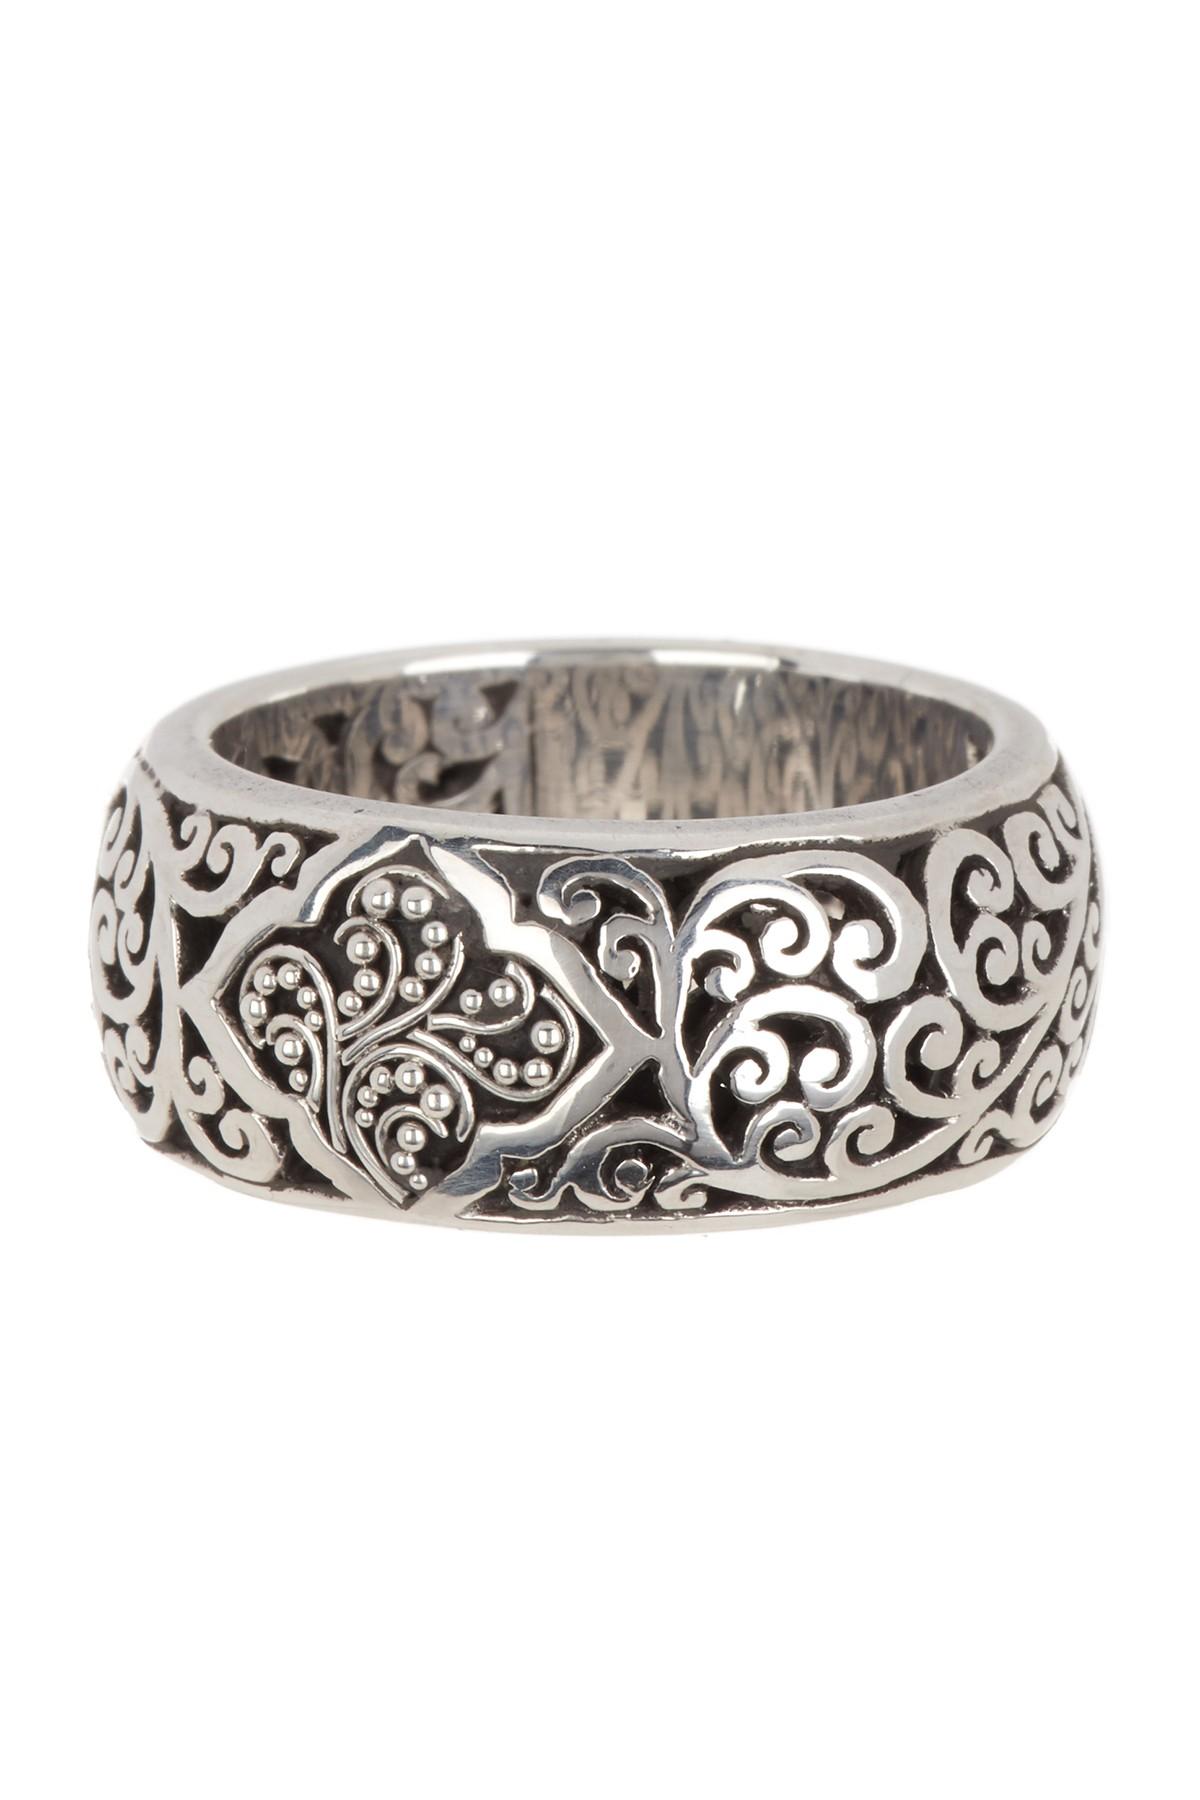 Lois Hill Sterling Silver Filigree Band Ring Size 6 in Metallic Lyst